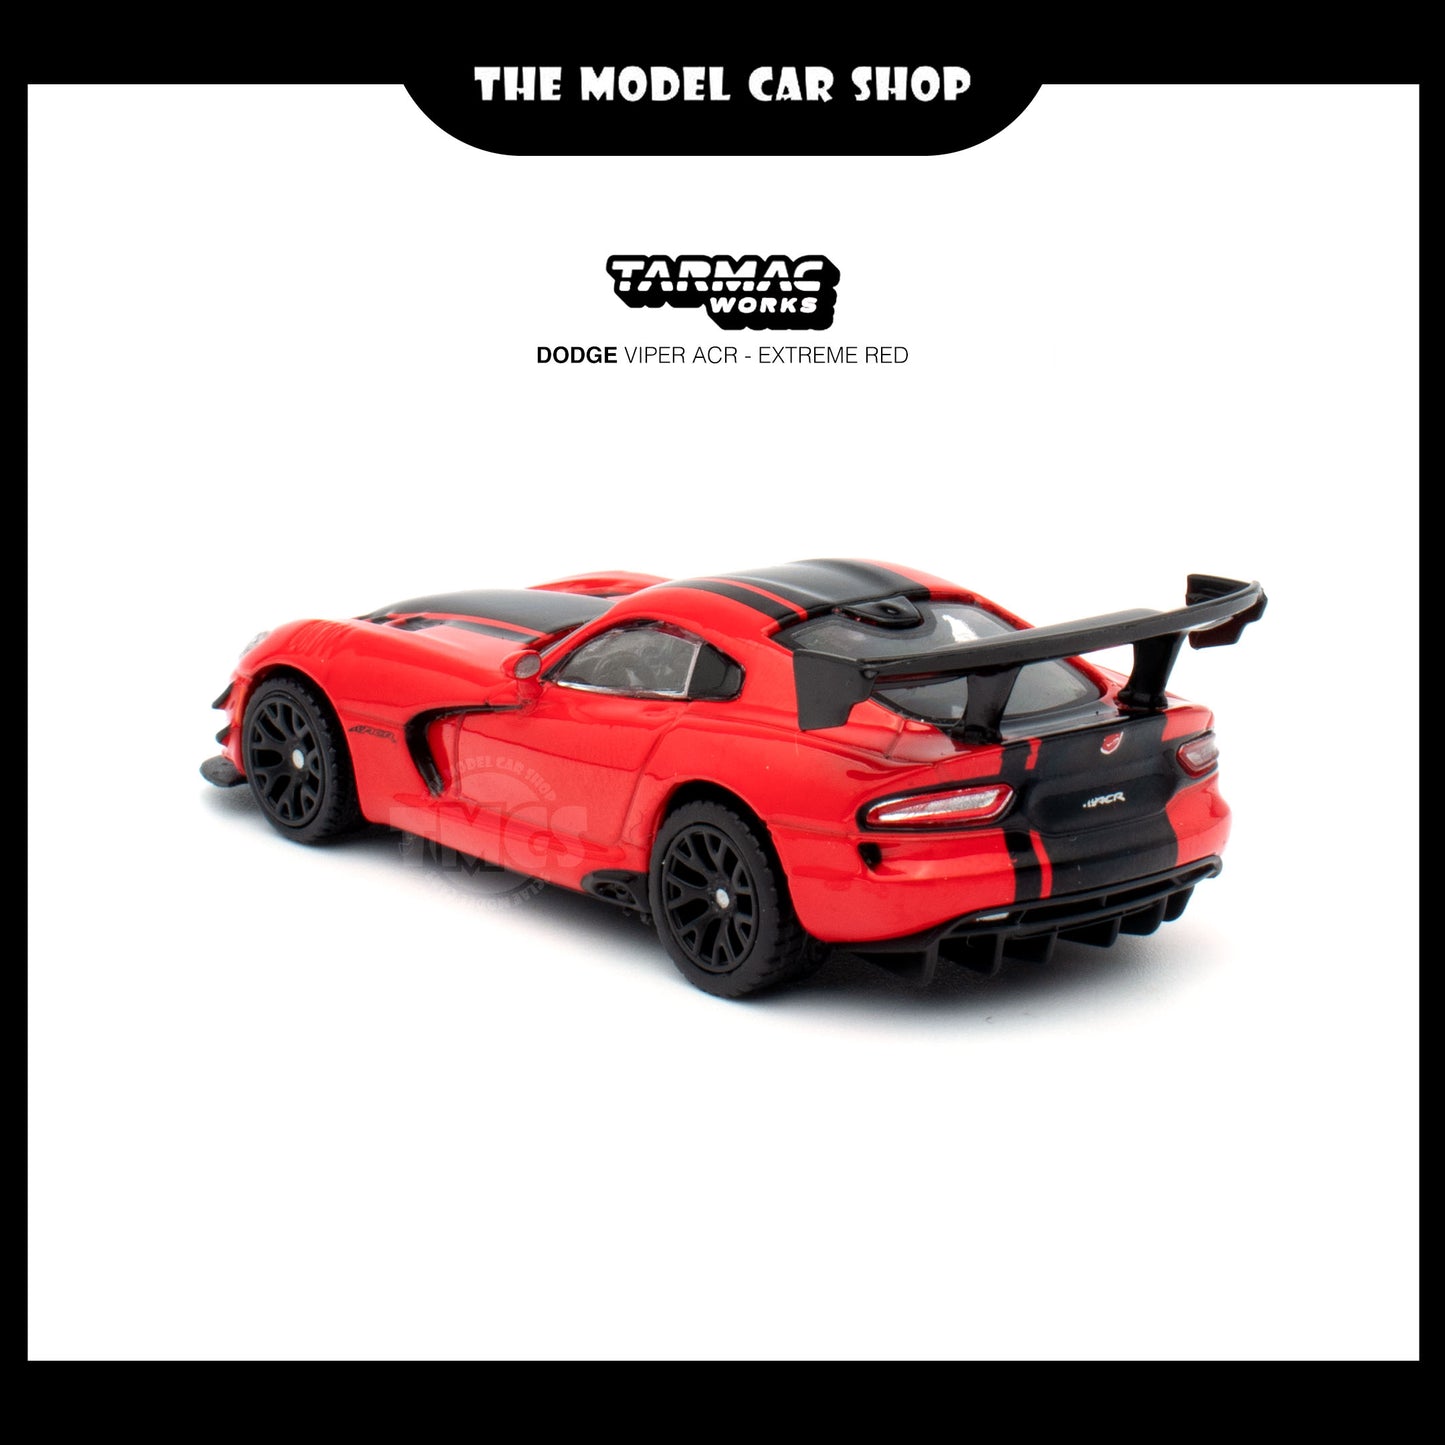 [Tarmac Works] Dodge Viper ACR - Extreme Red